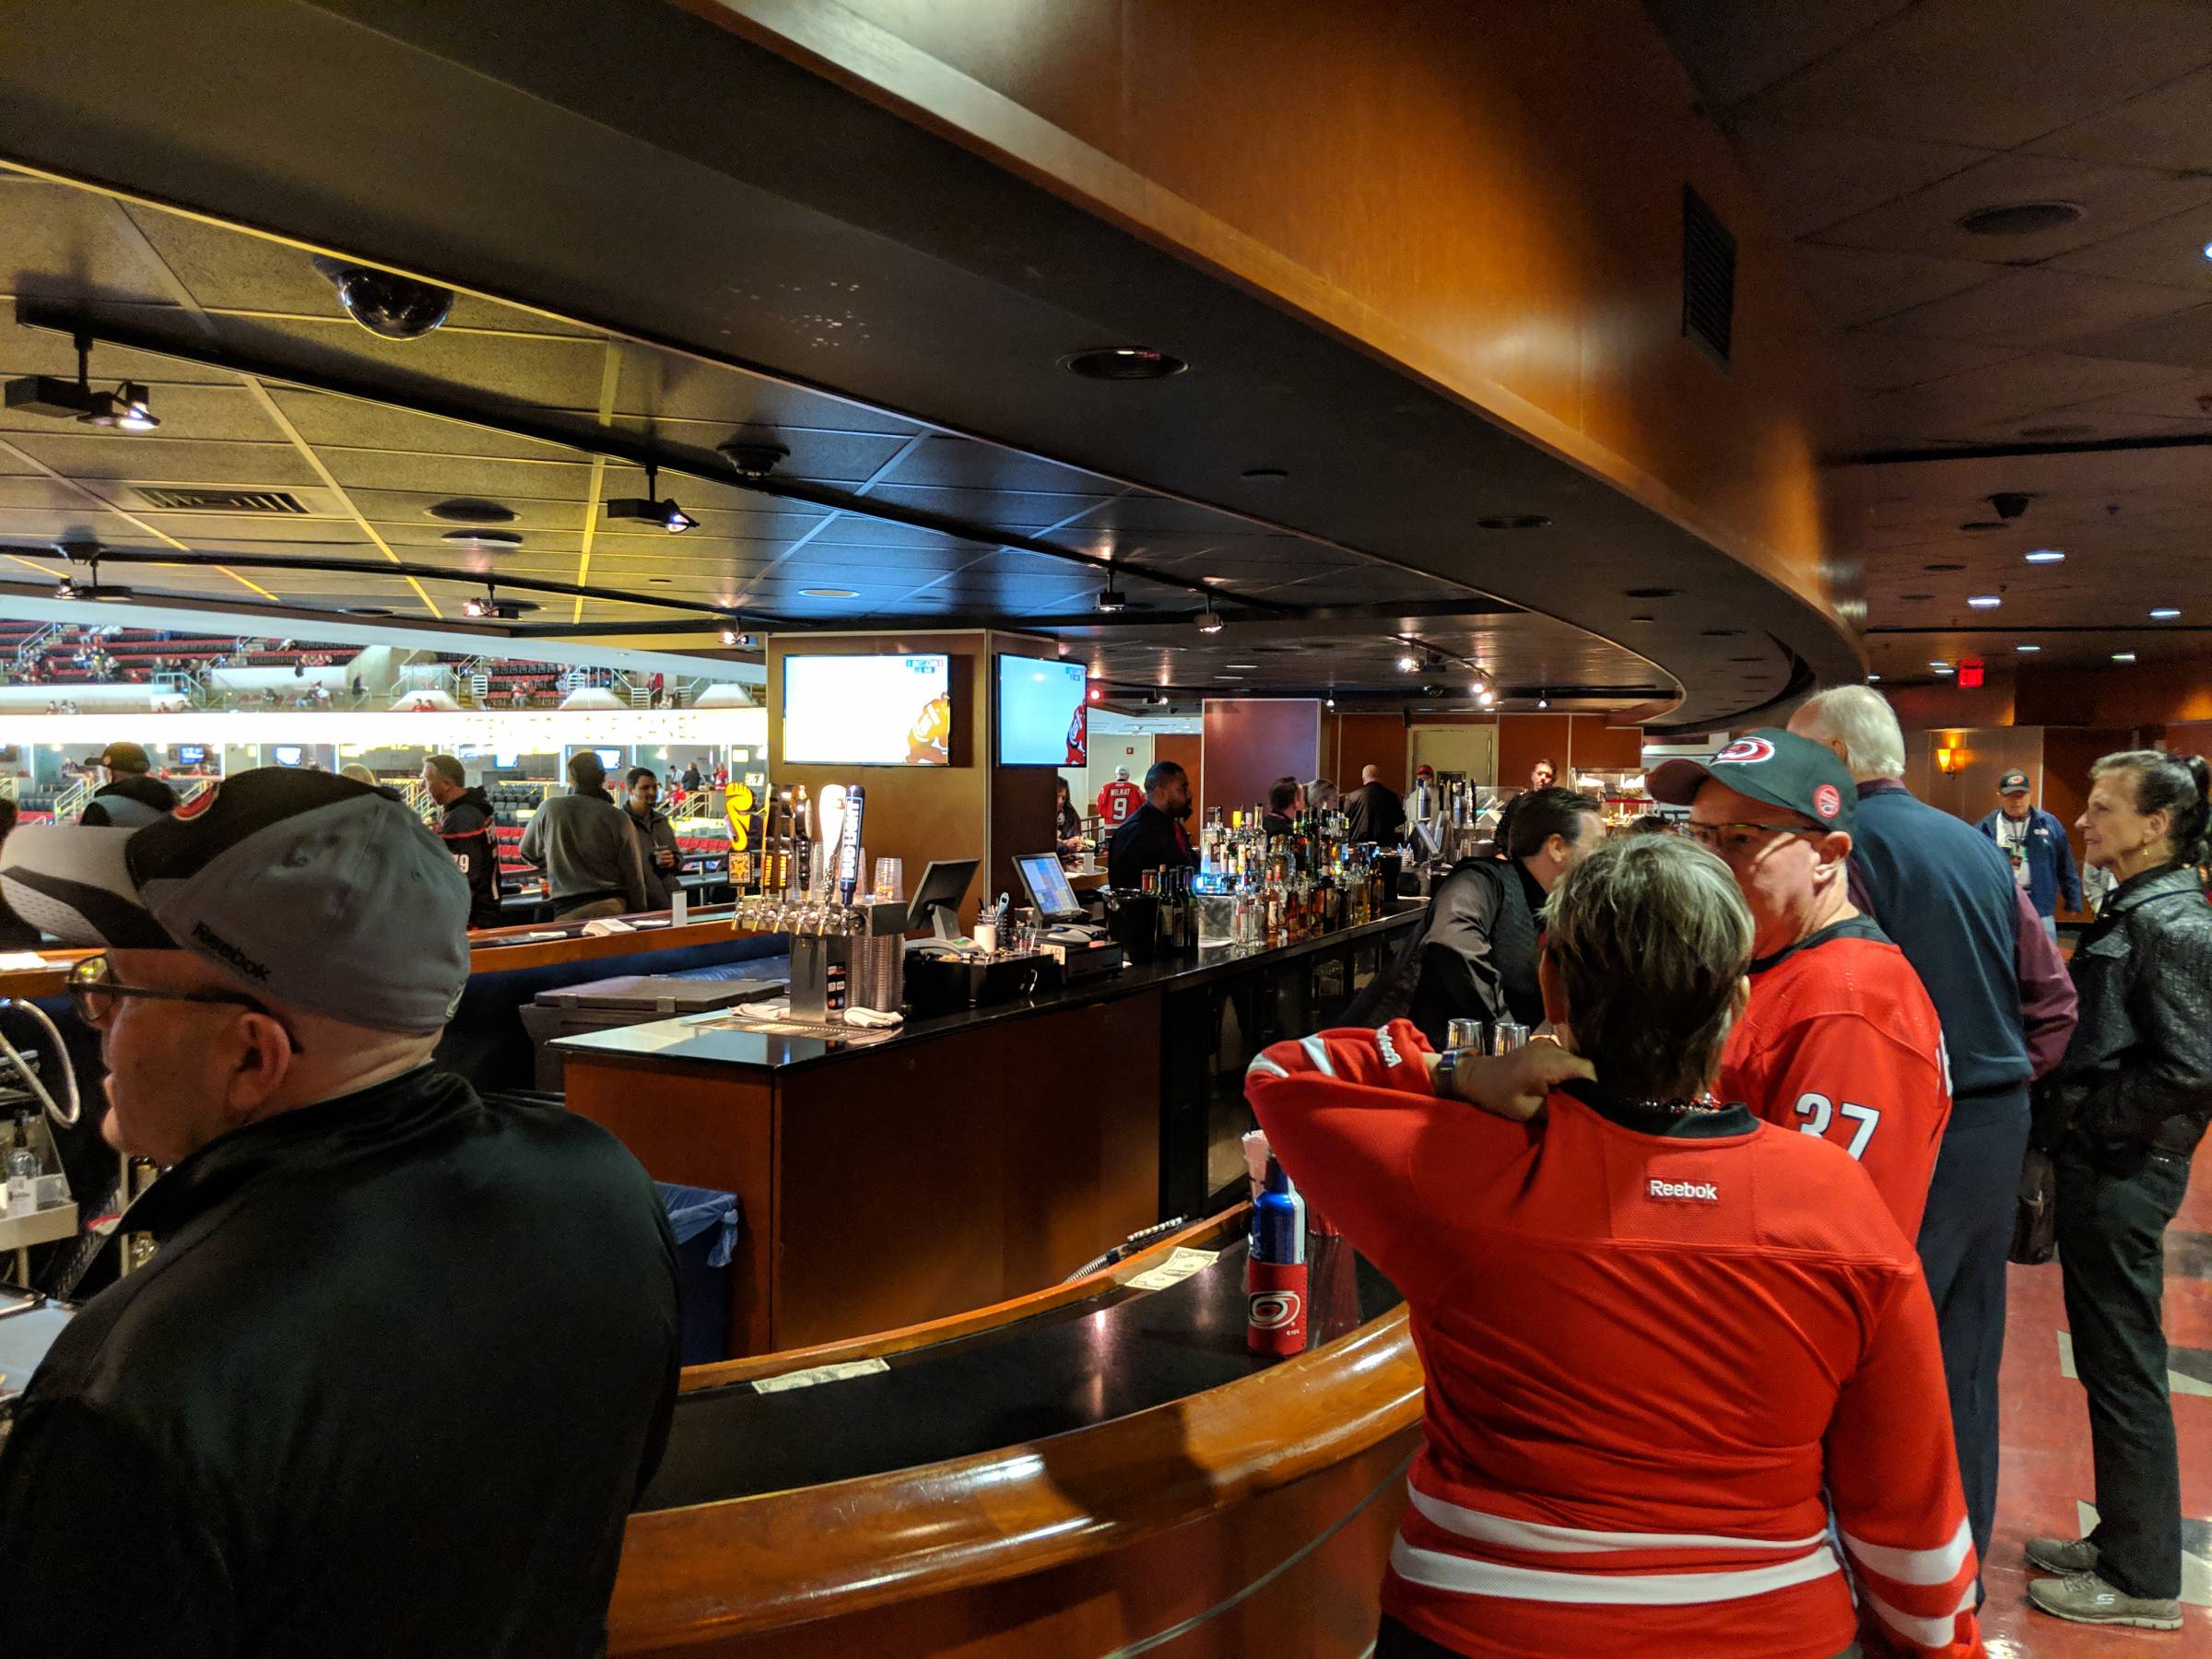 Ledge Lounge at PNC Arena - Stadium in in Raleigh, NC